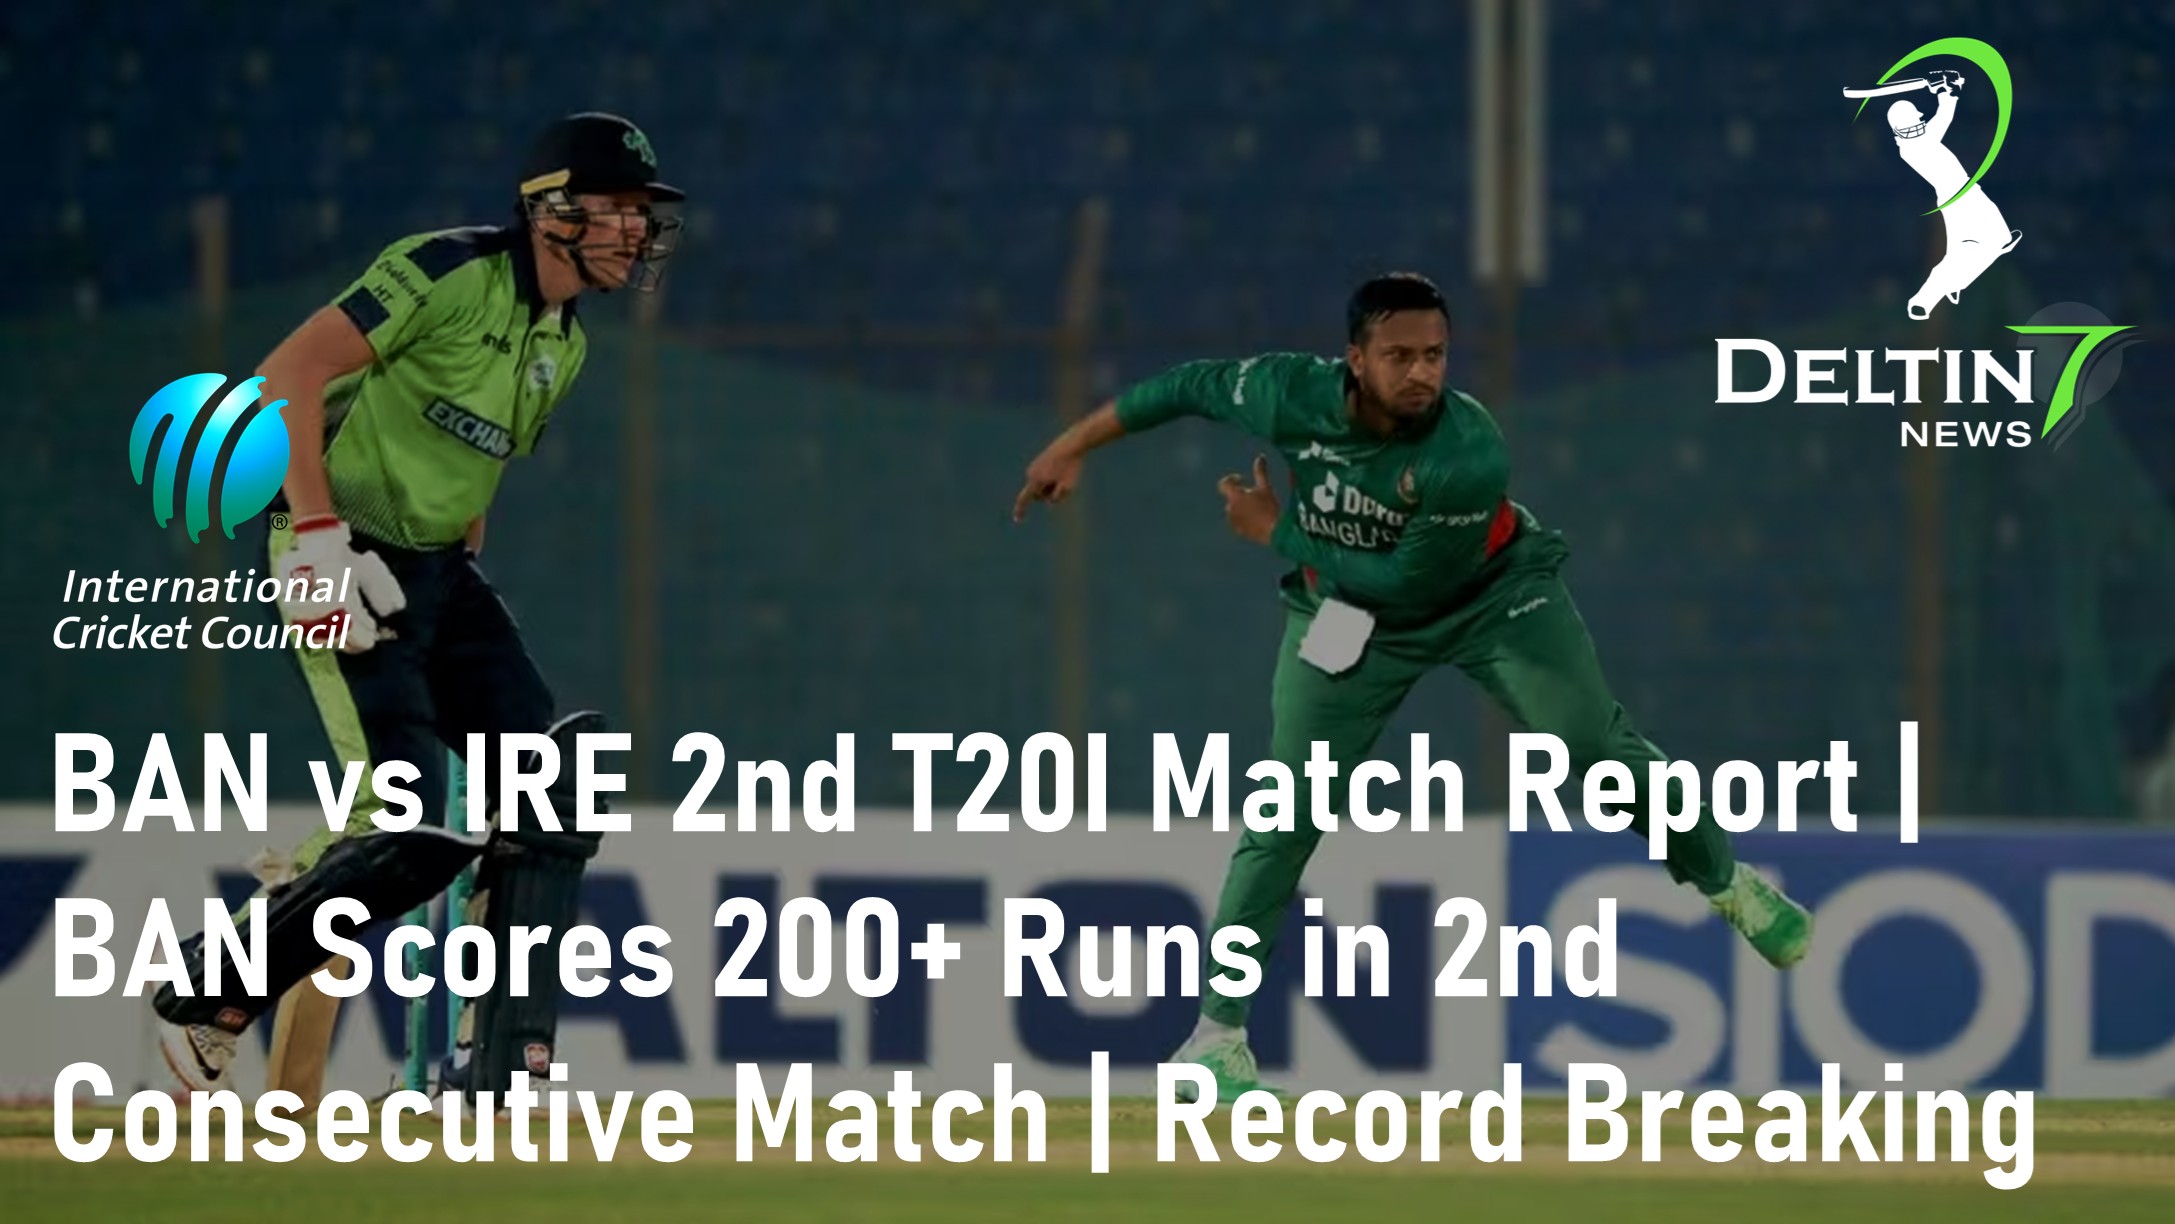 BAN vs IRE 2nd T20I Match Report | Bangladesh Scores 200+ Runs in 2nd Consecutive Match | T20I Series Record Breaking